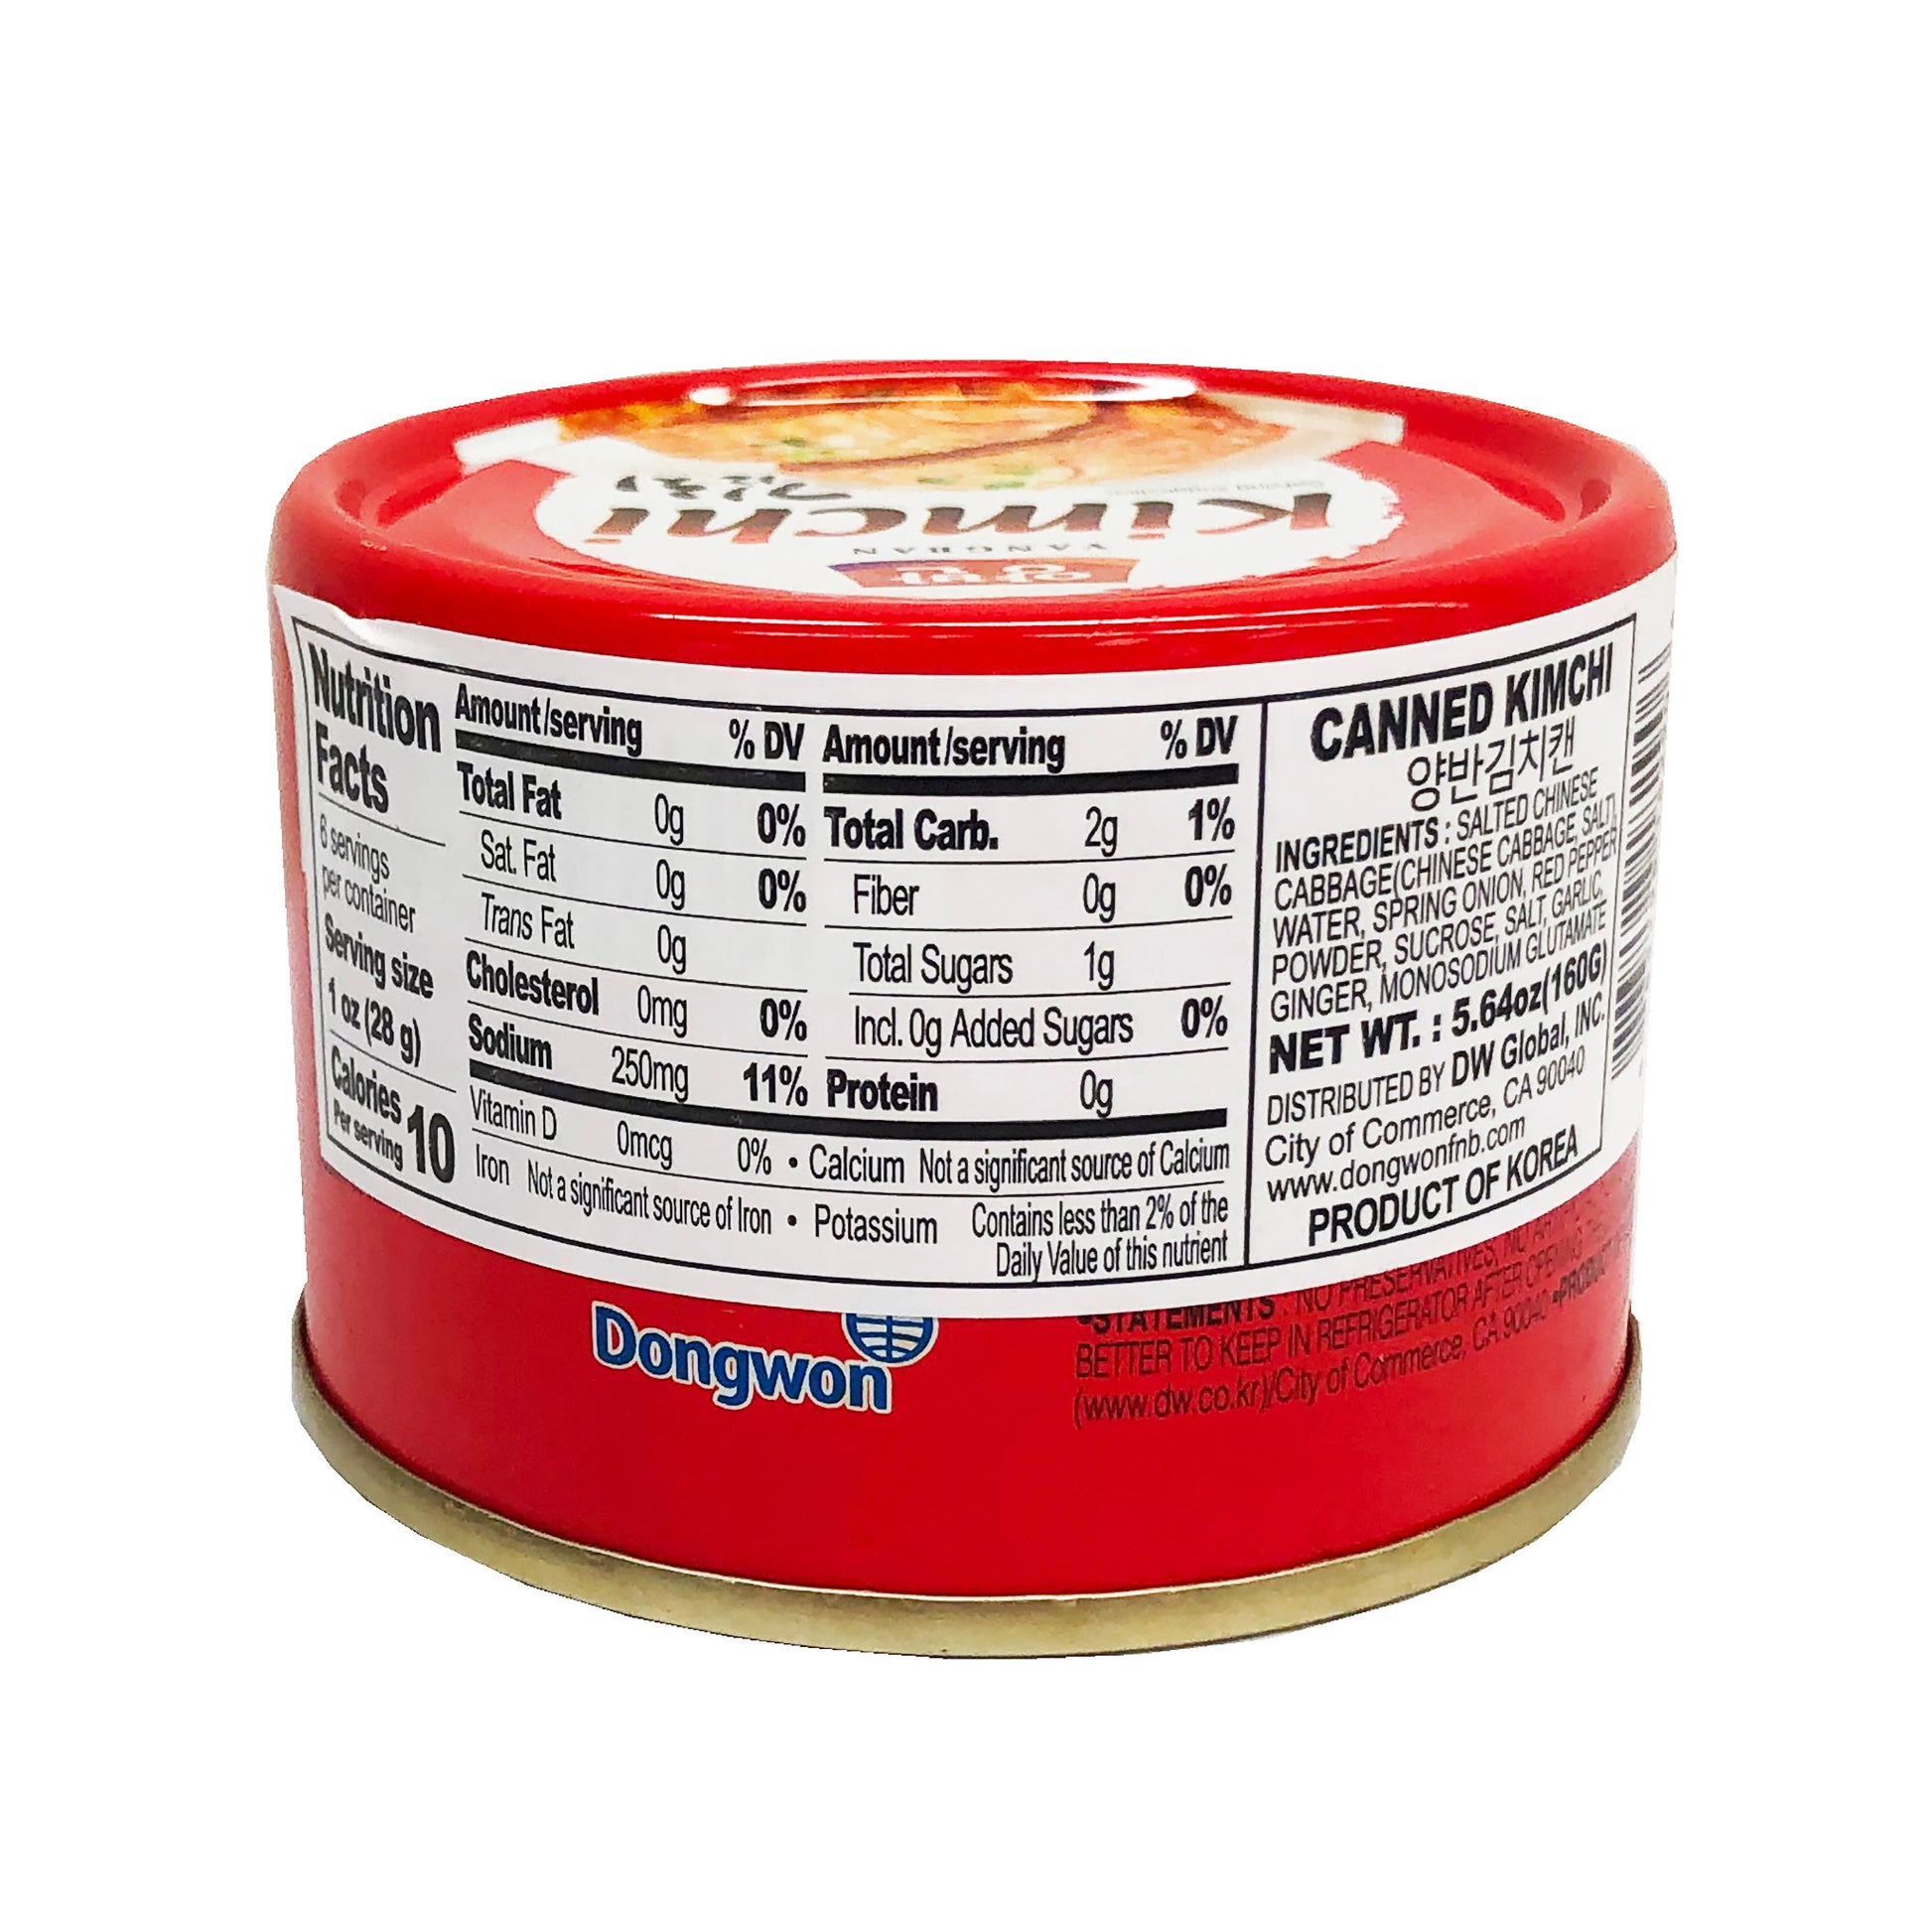 Back graphic image of Yangban Kimchi In Can 5.64oz